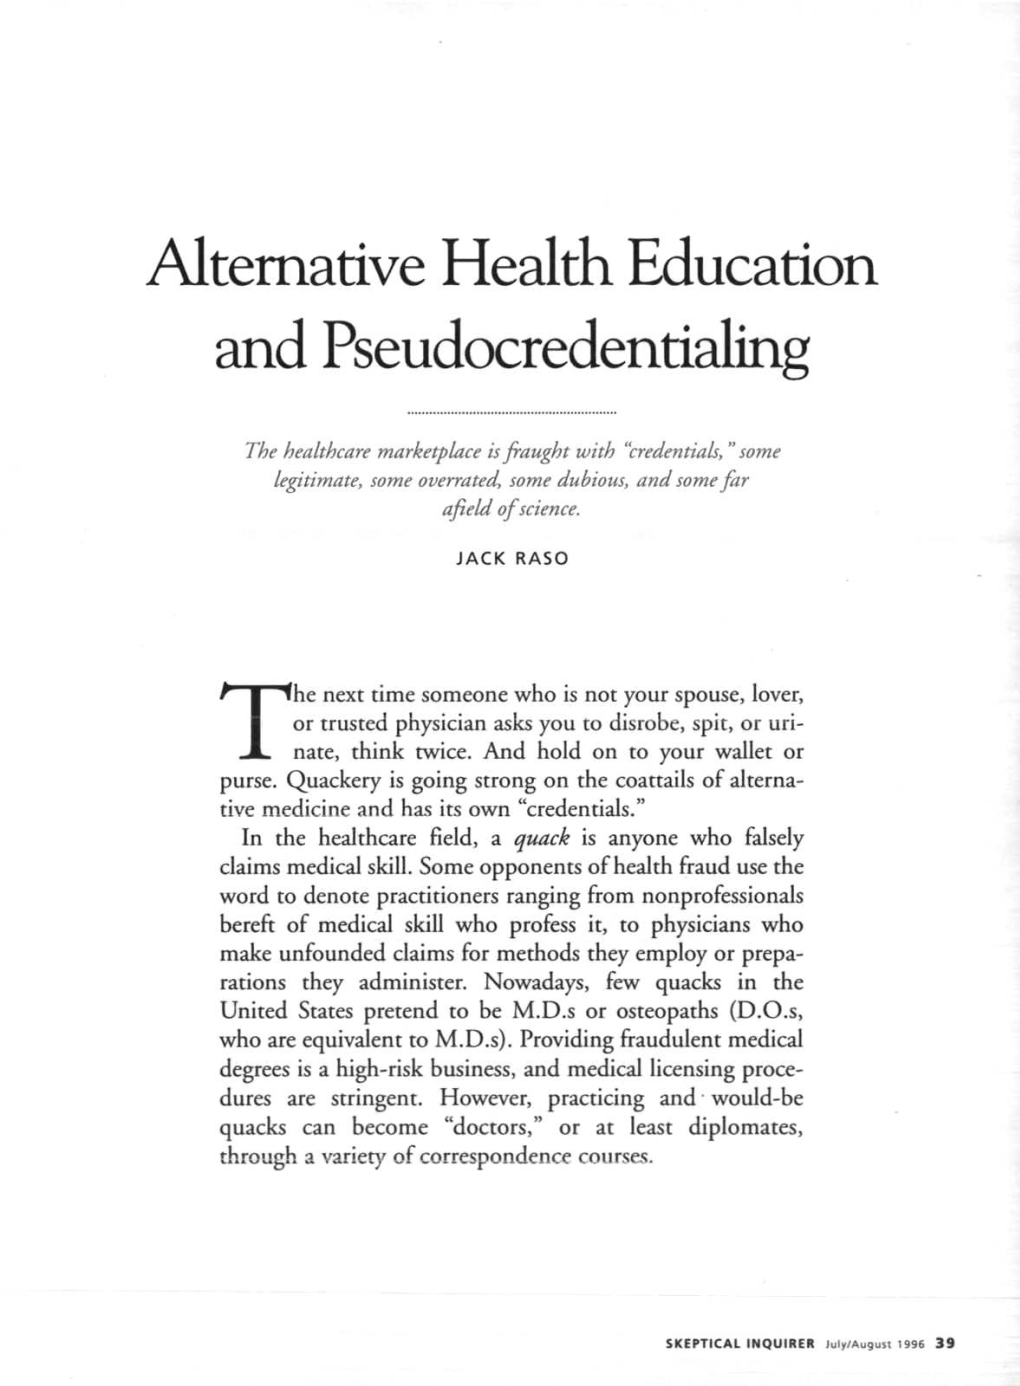 Alternative Health Education and Pseudocredentialing